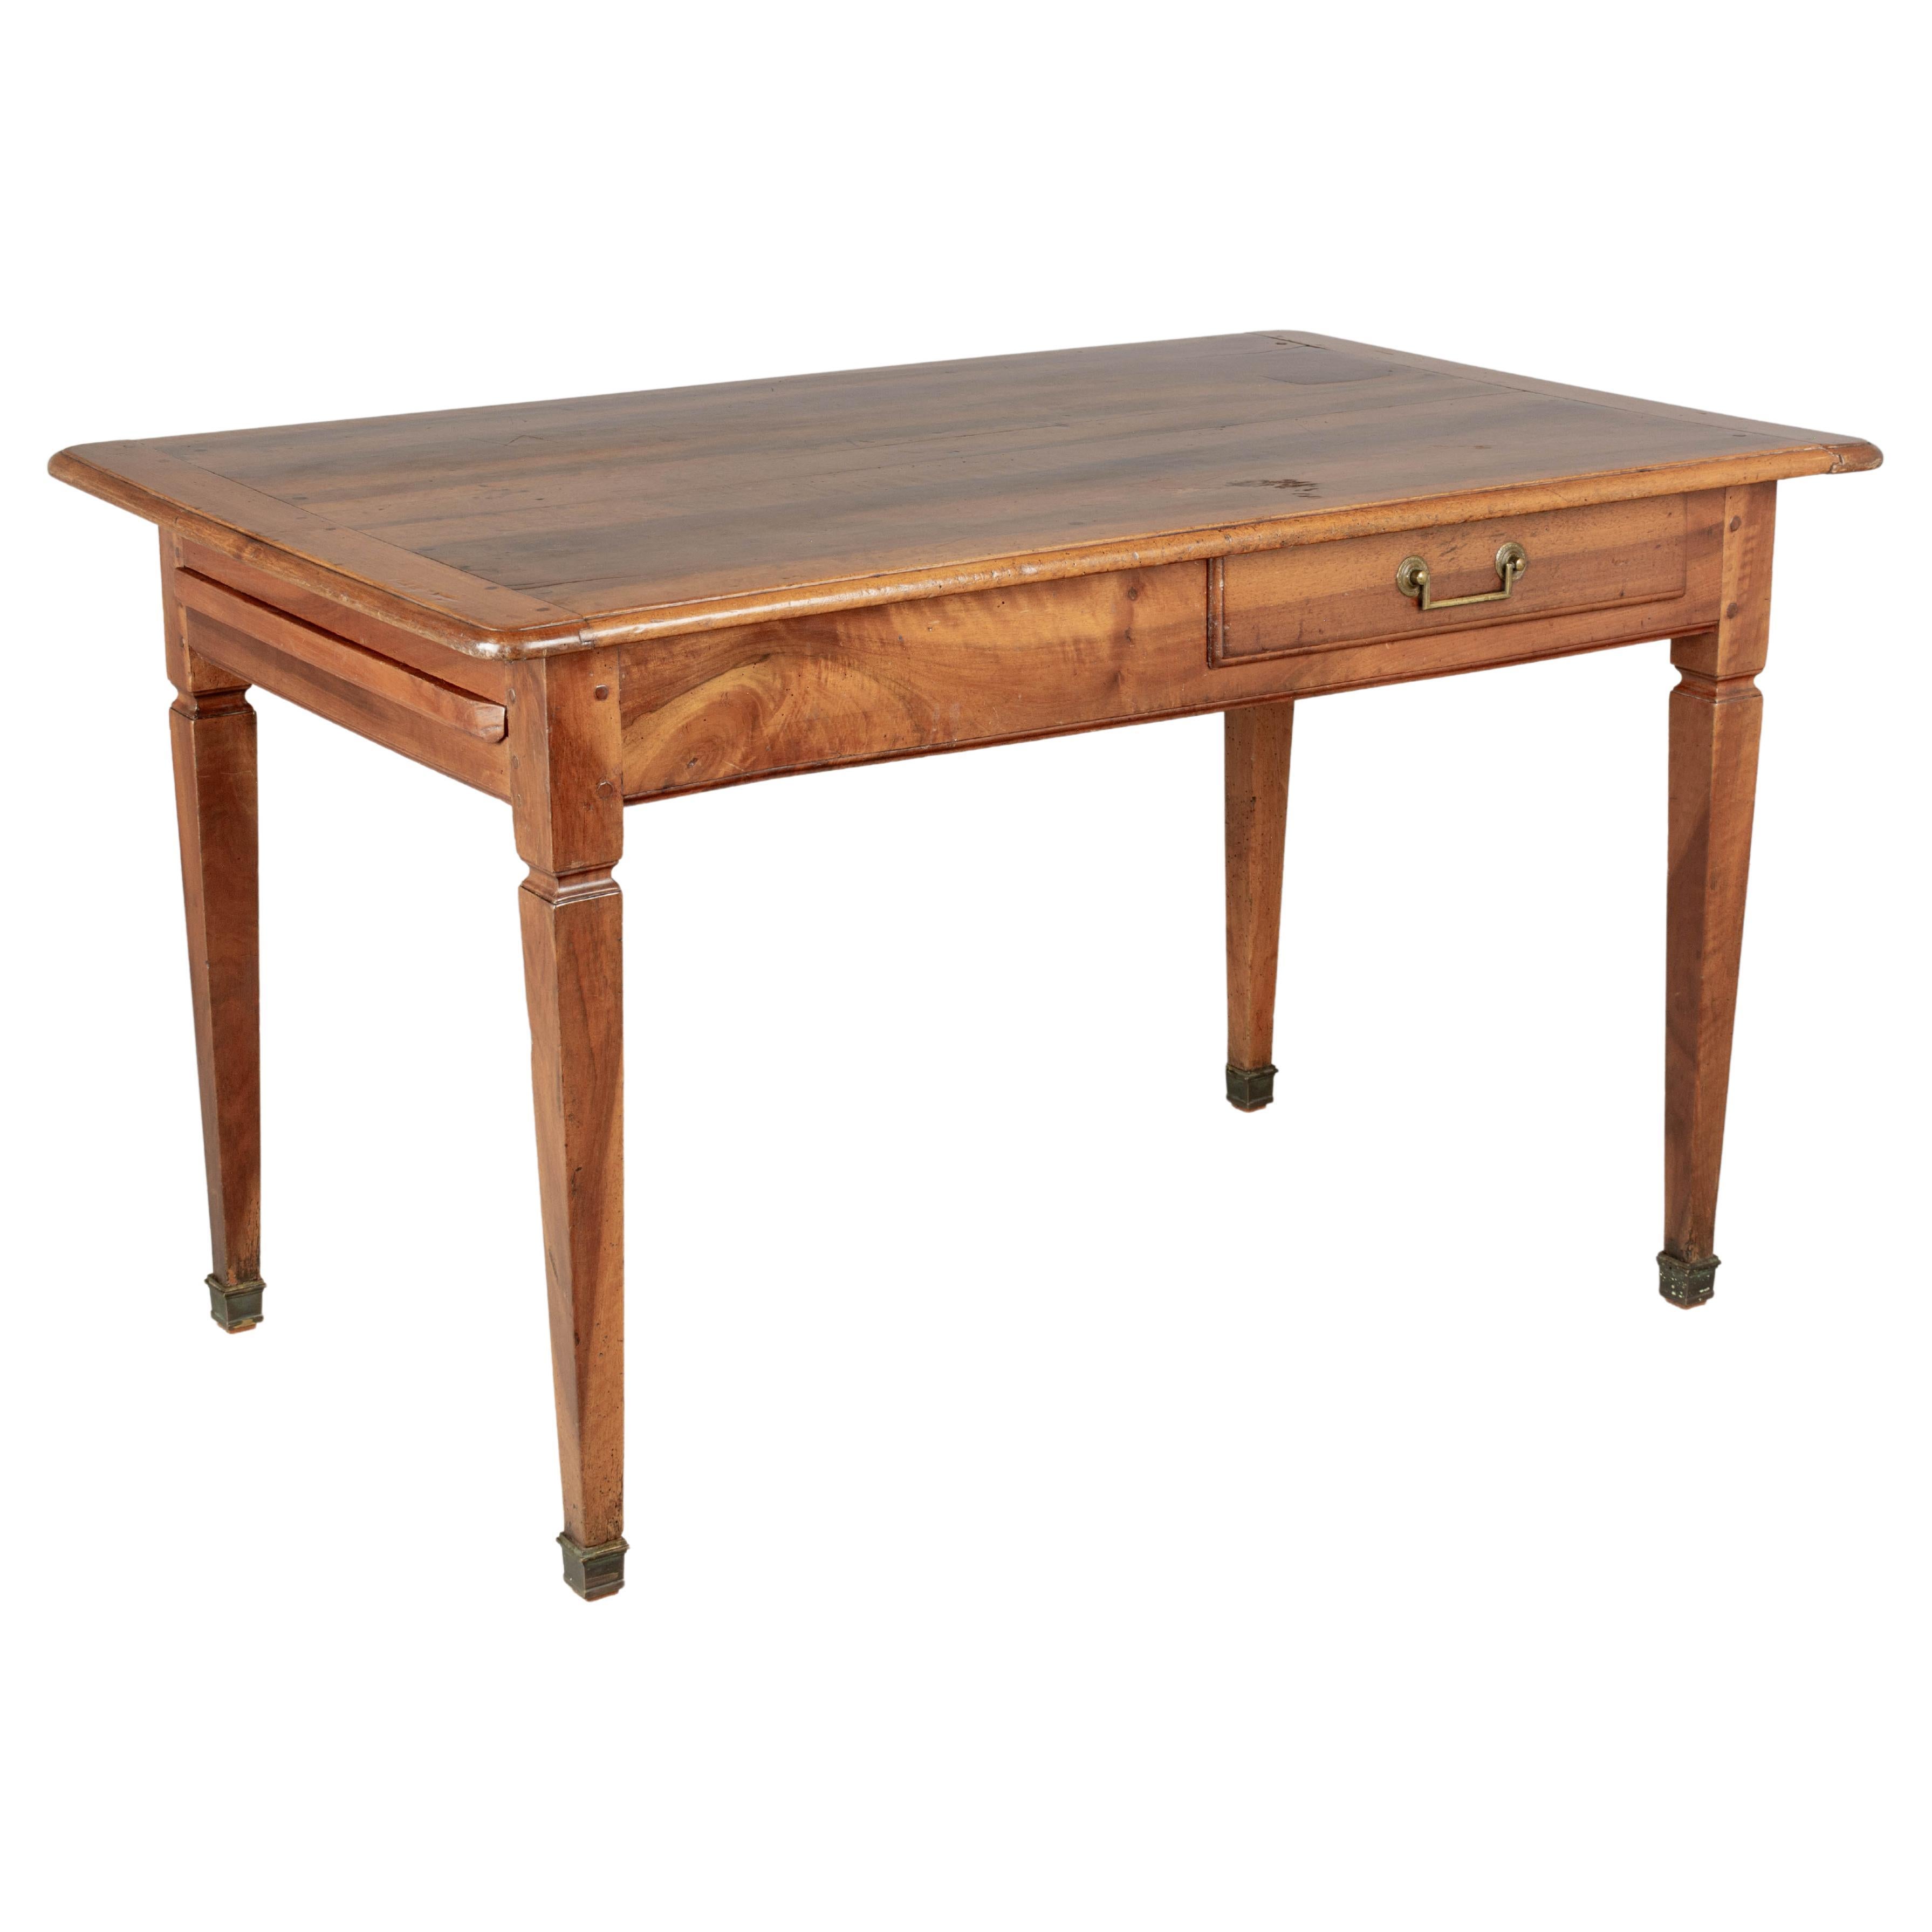 19th Century Country French Walnut Farm Table or Dining Table For Sale